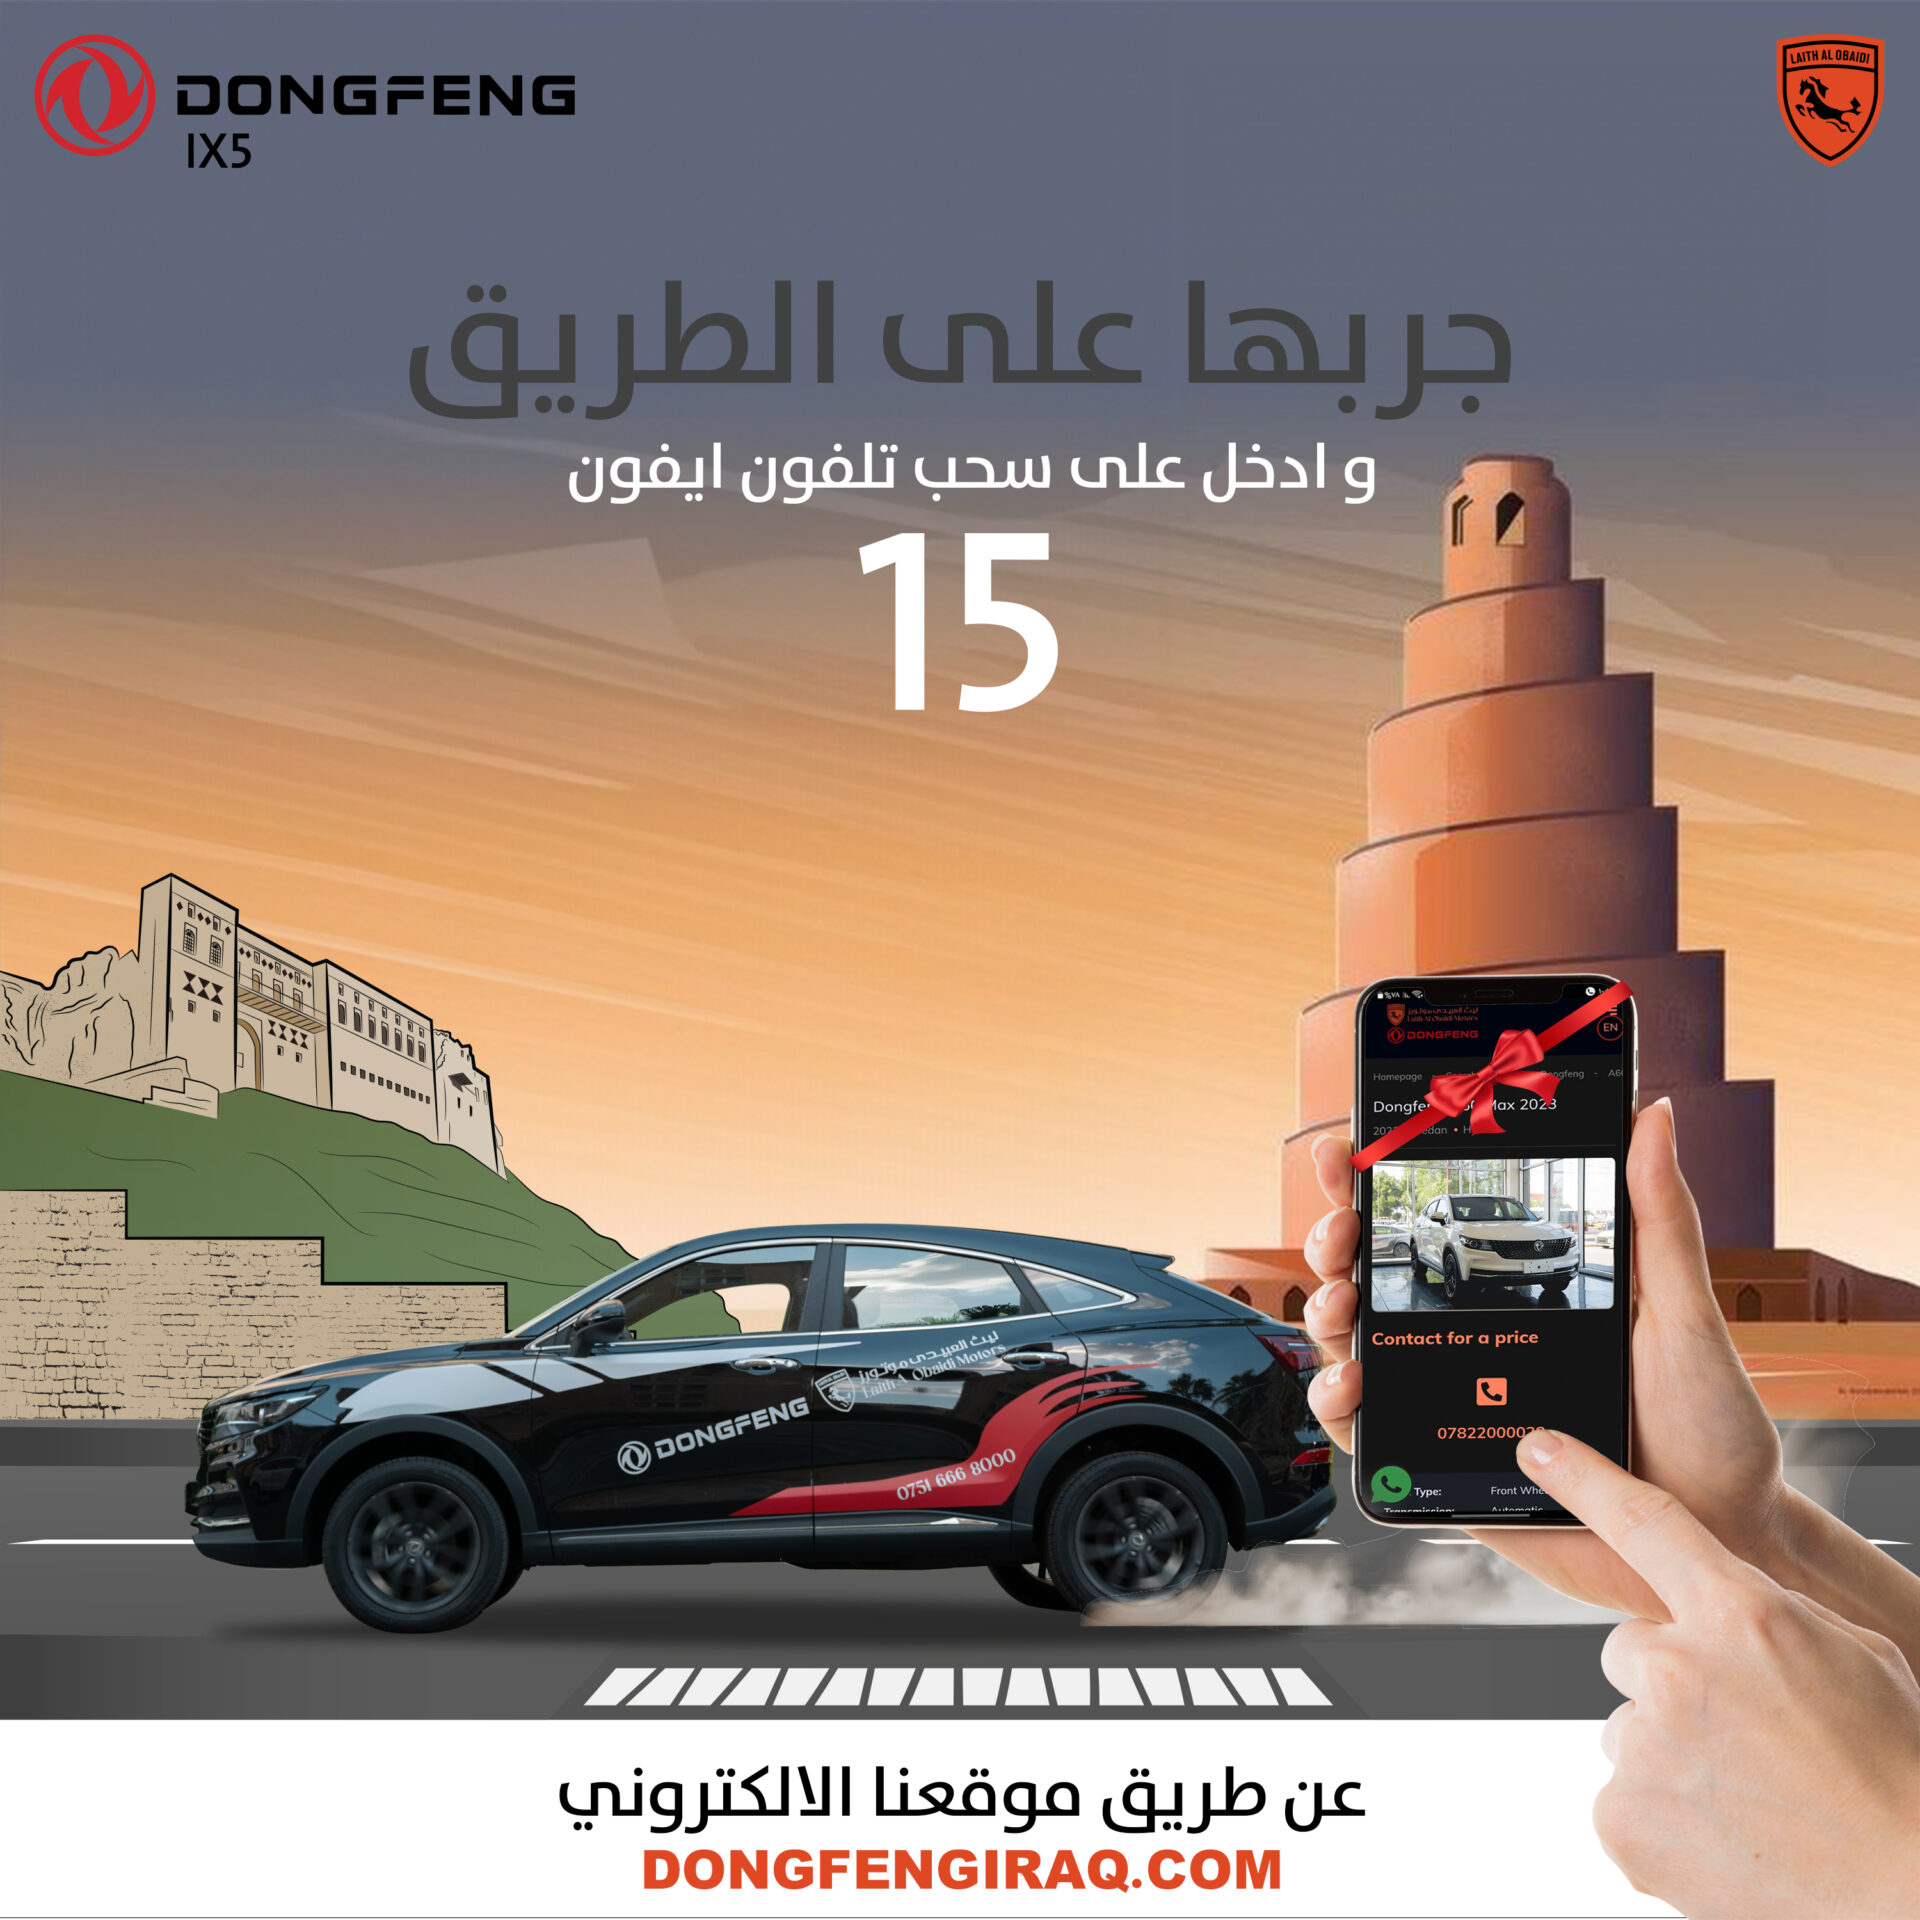 Dongfeng test drive